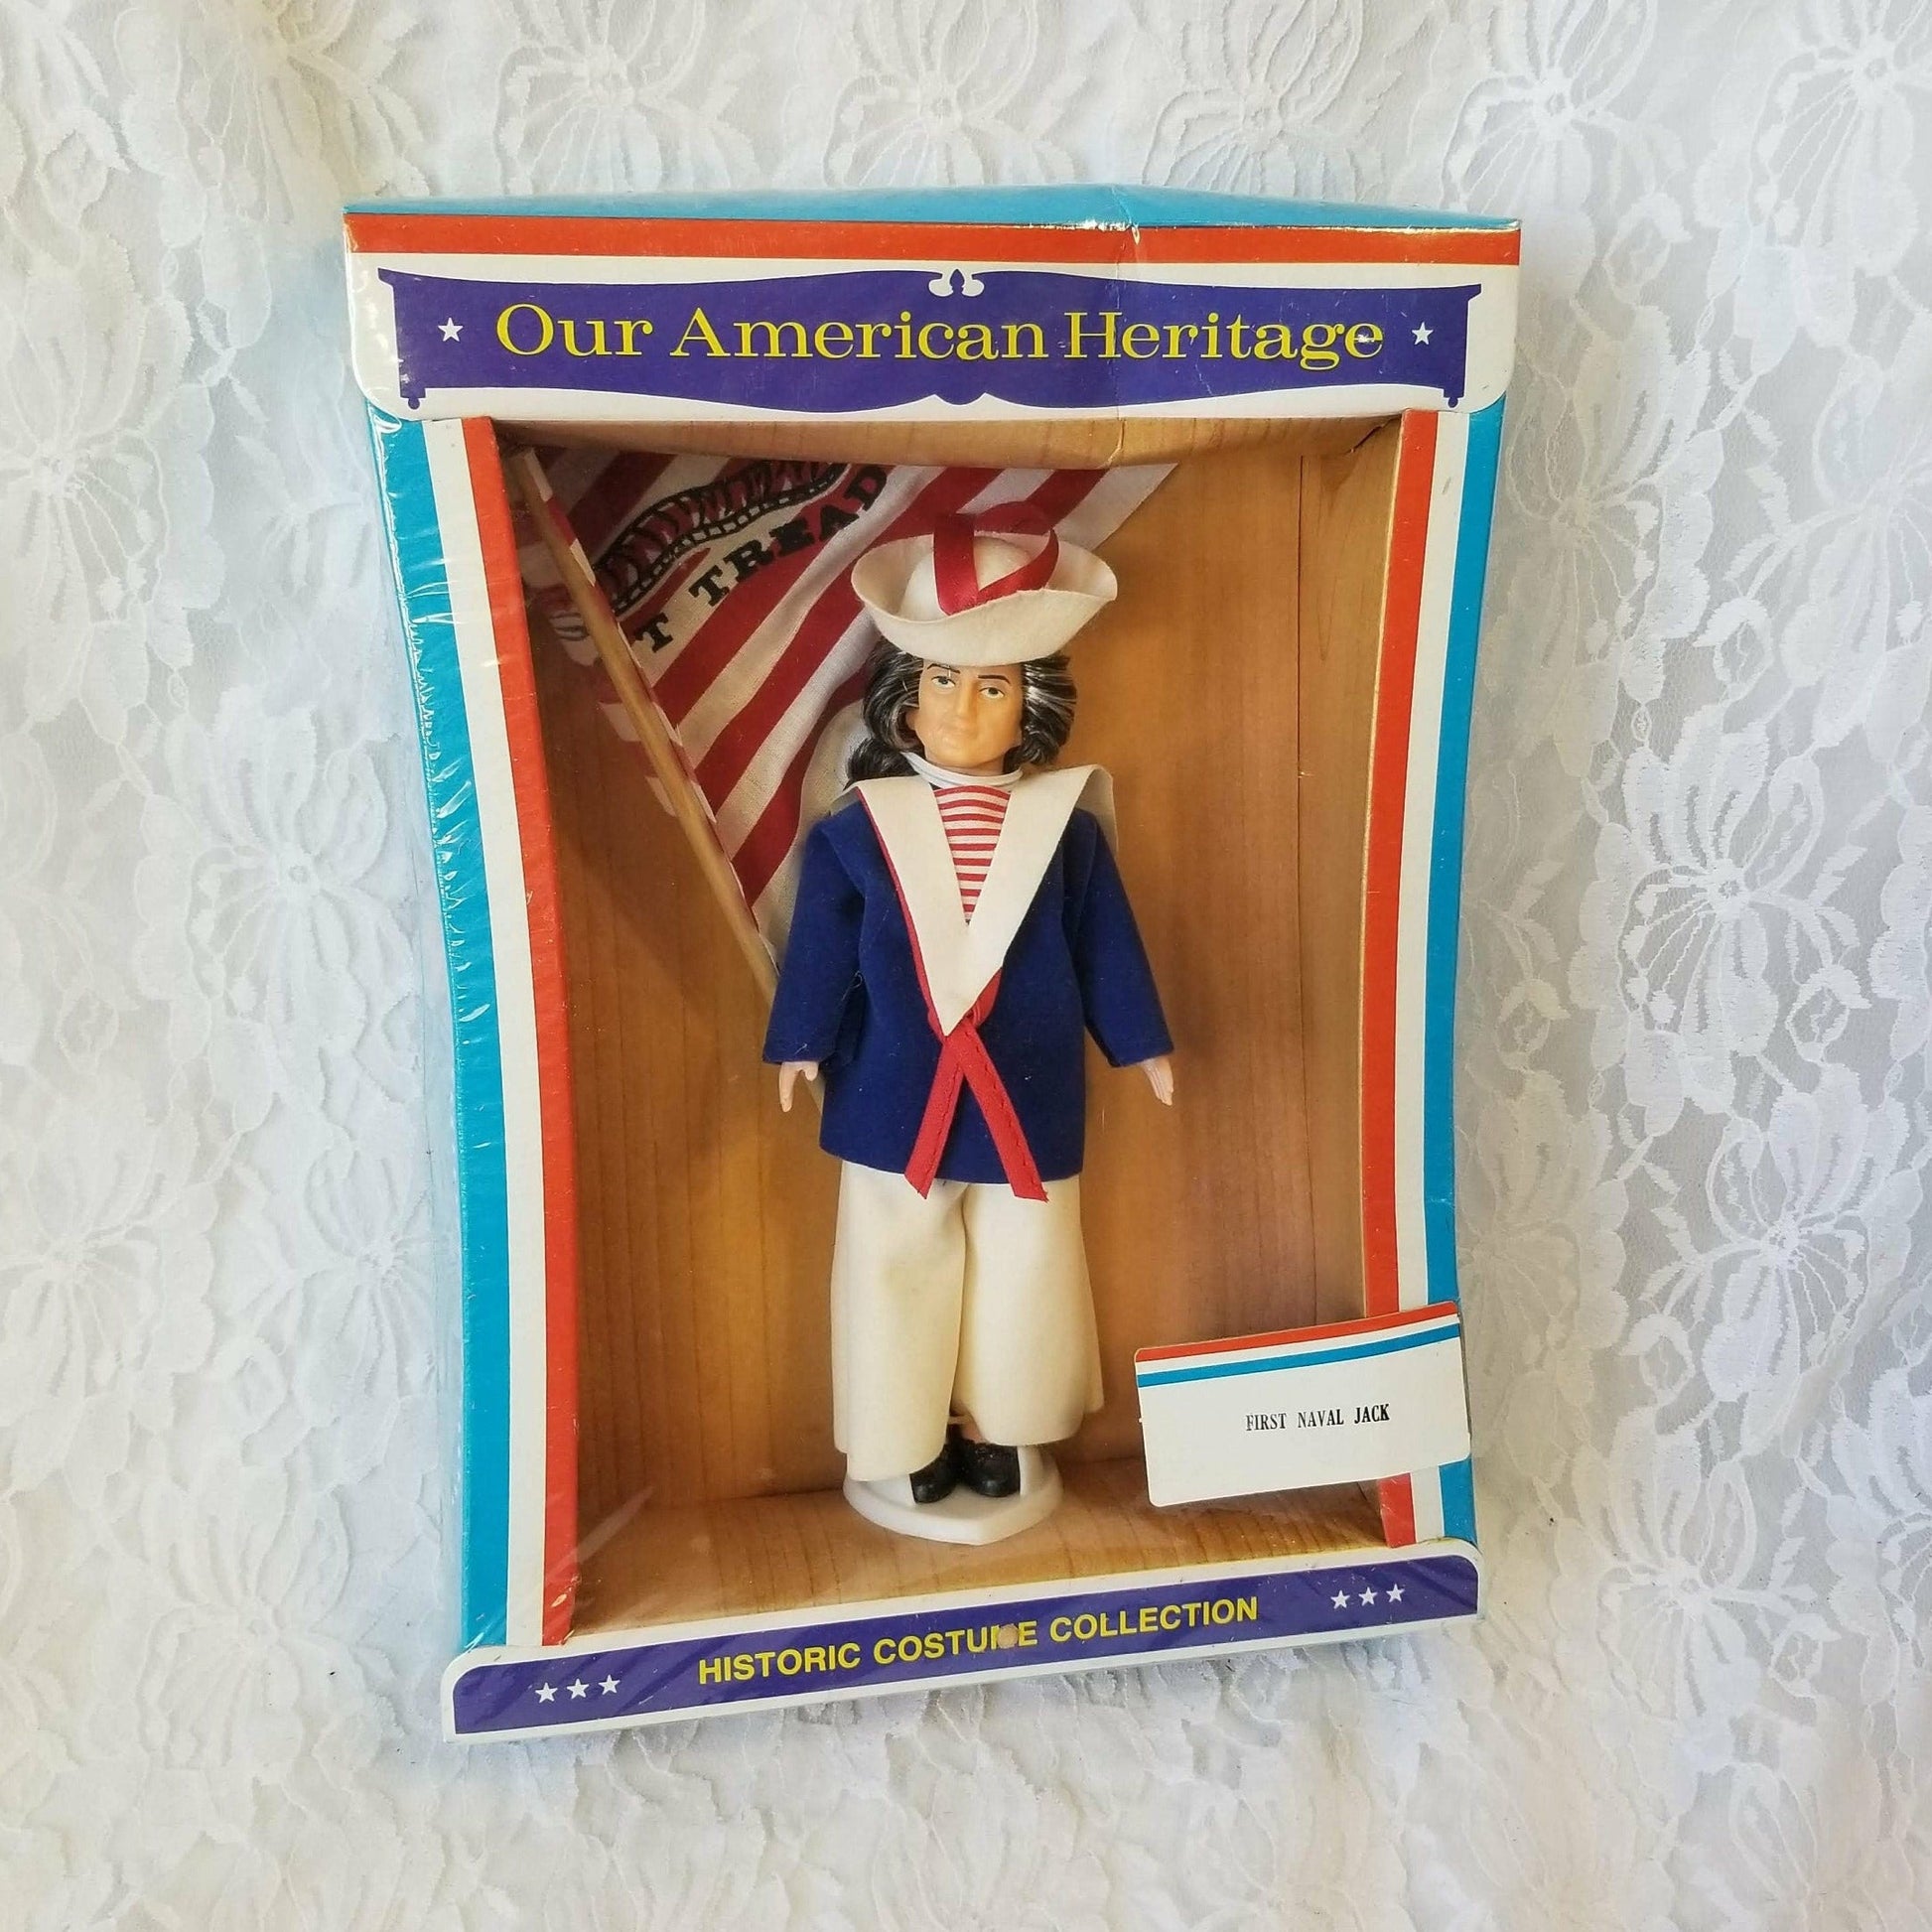 This is a NEW in BOX doll from 1976, nobody has ever taken him out of the box! He is in excellent condition.  A wonderful collector's item or a gift for a veteran in your family.  Excellent condition comes with a flag included.   The First Navy Jack (flag) is the current naval jack of the United States, authorized by the U.S. Navy, and is flown from the jackstaff of commissioned vessels of the U.S. Navy while moored pier-side or at anchor. 